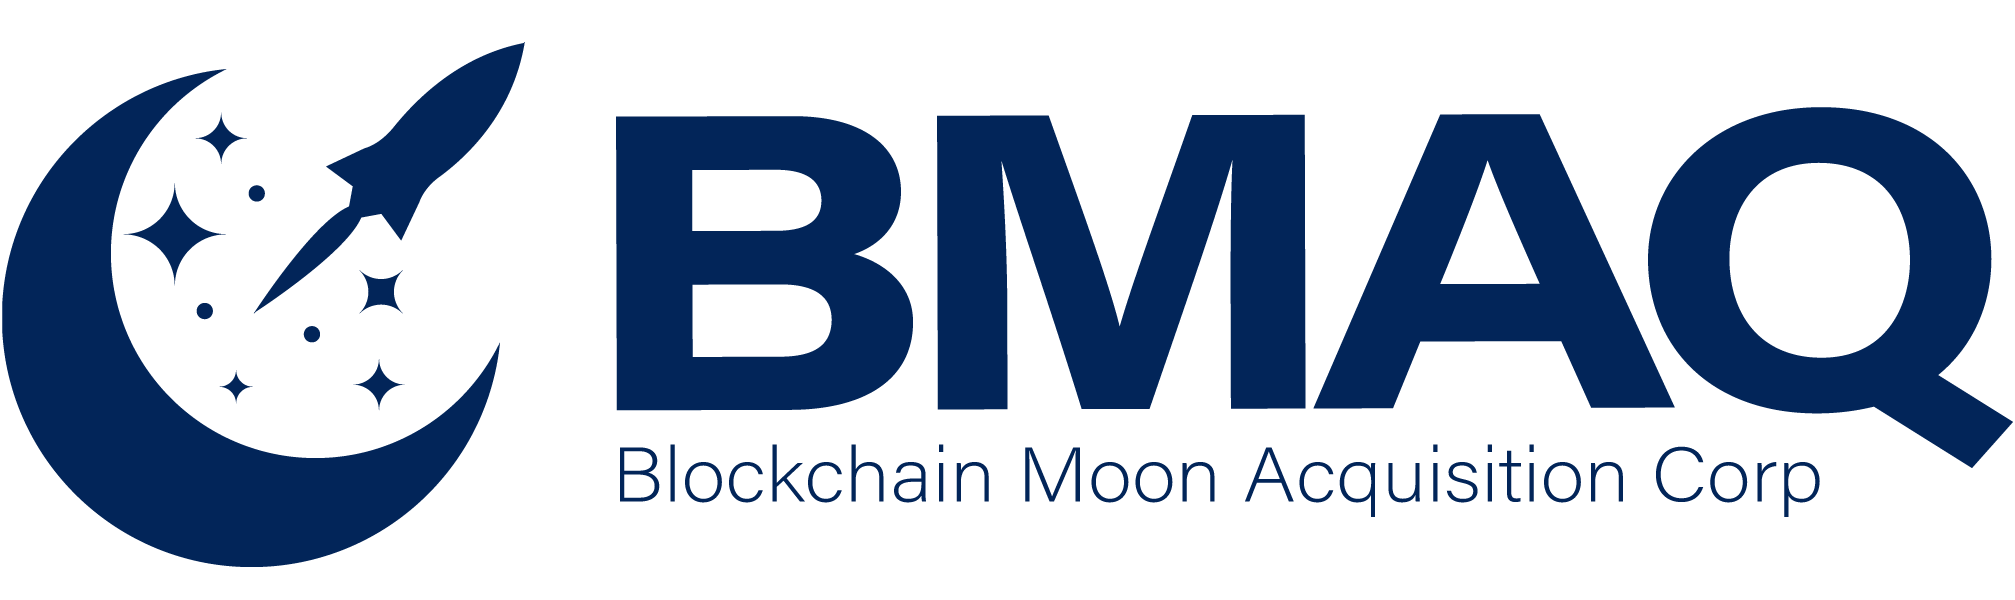 Blockchain Moon Acquisition Corp. Announces Closing of Over-Allotment Option in Connection With Its Initial Public Offering